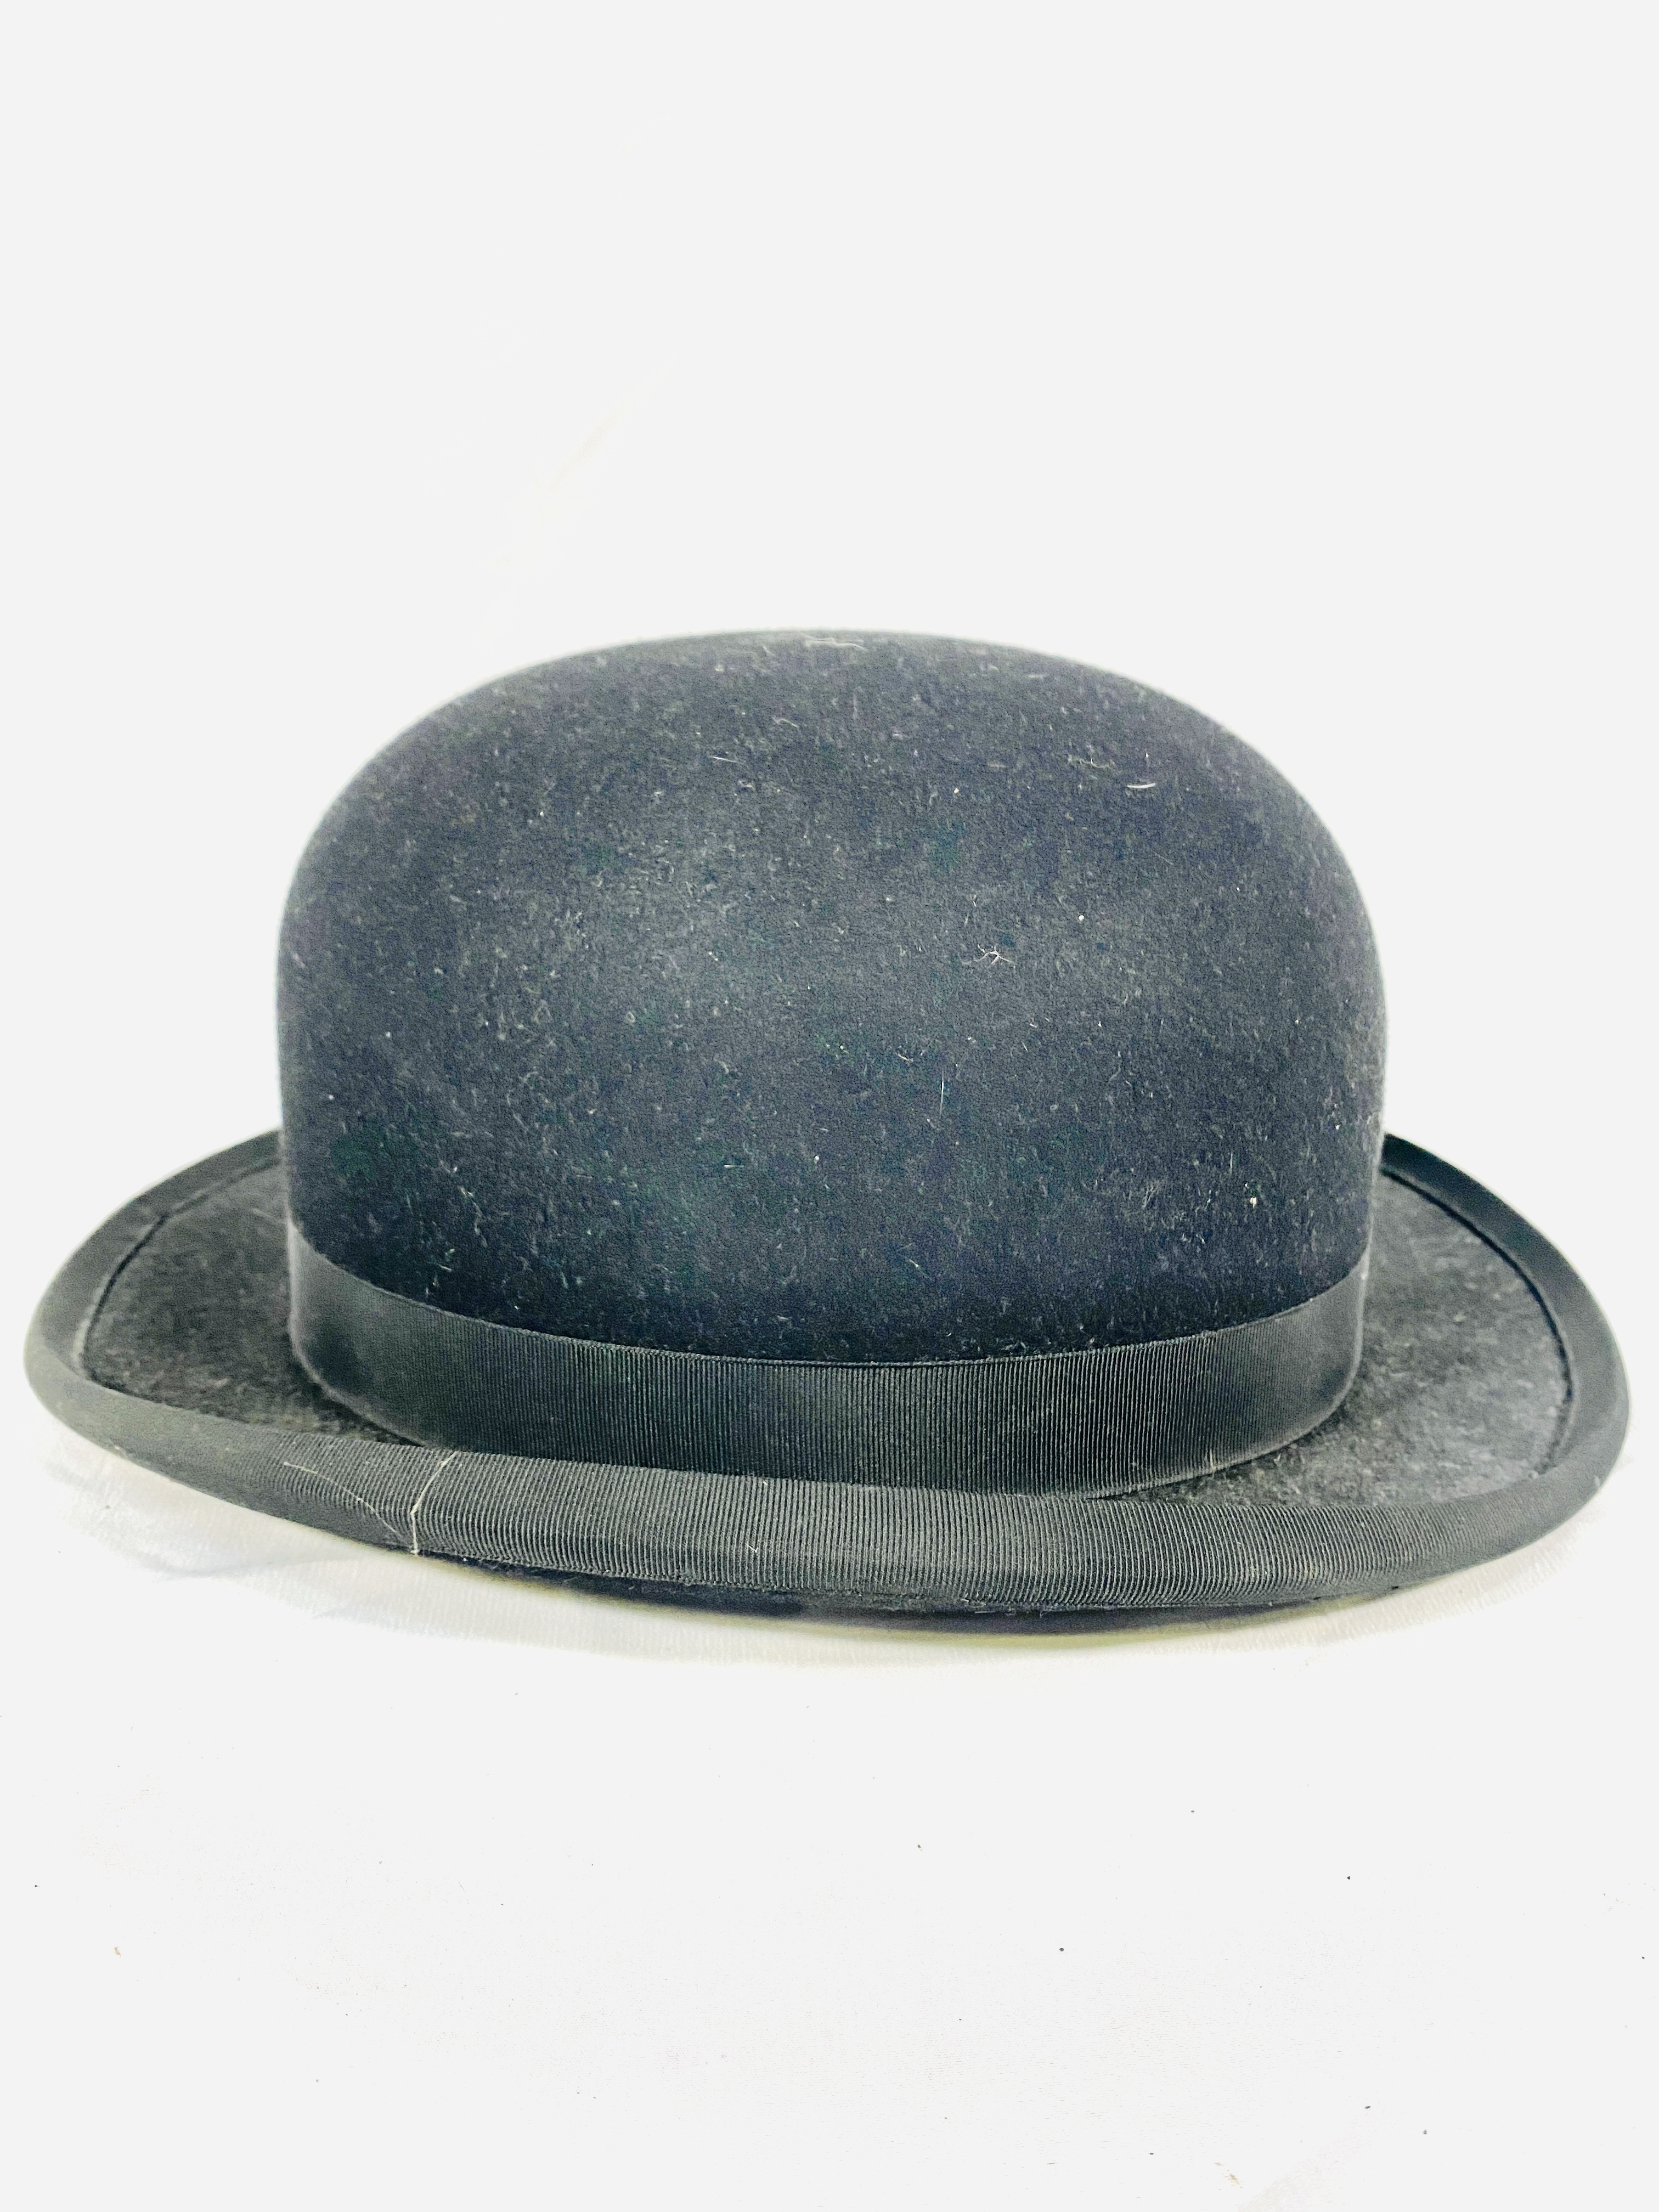 A silk top hat together with a bowler hat - Image 3 of 9